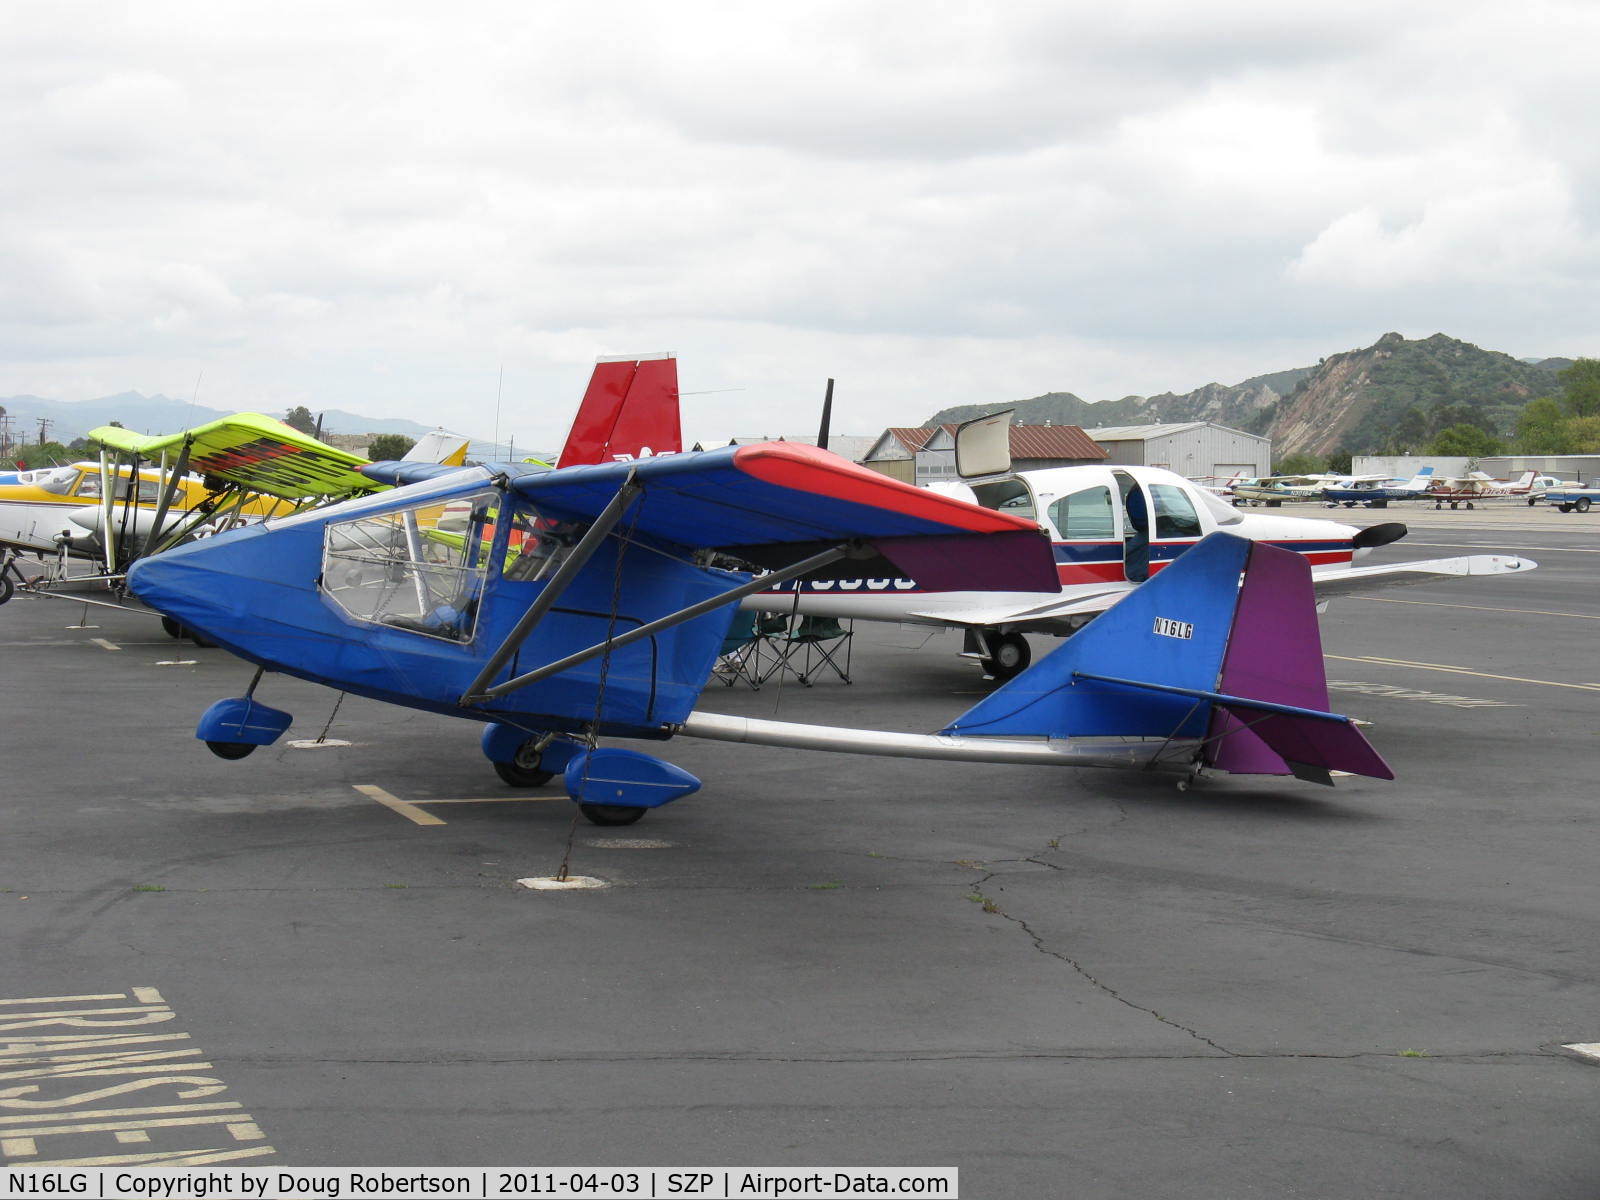 N16LG, 1997 Griffith Layton D LDG HAWK C/N 10LDG, 1997 Griffith LDG HAWK, Rotax 503 2 cylinder two stroke 52 Hp pusher engine, arrived from CMA in transient parking